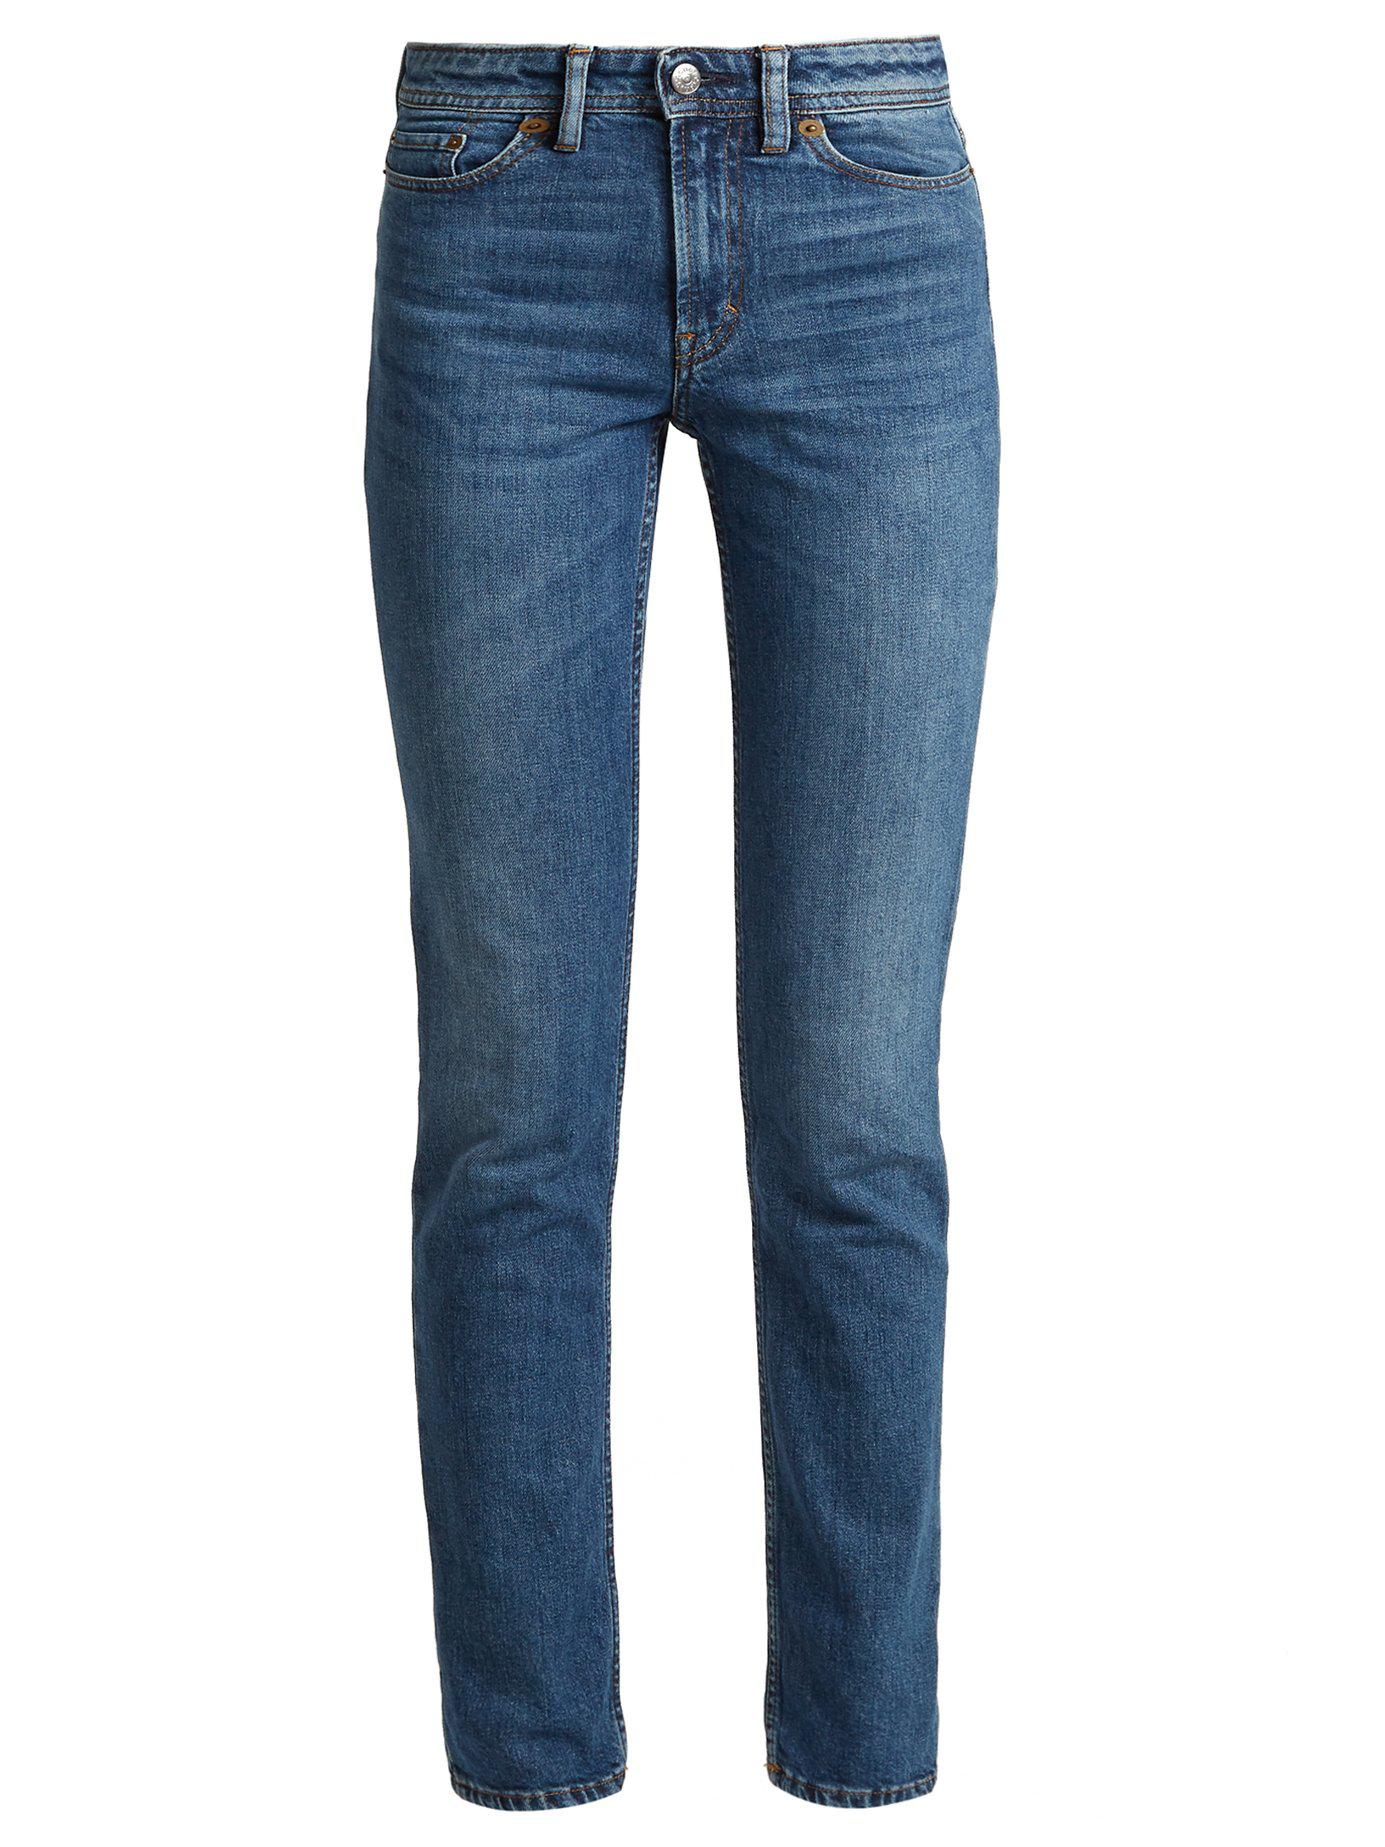 Acne Studios Denim South Mid-rise Straight-leg Jeans in Mid Blue 